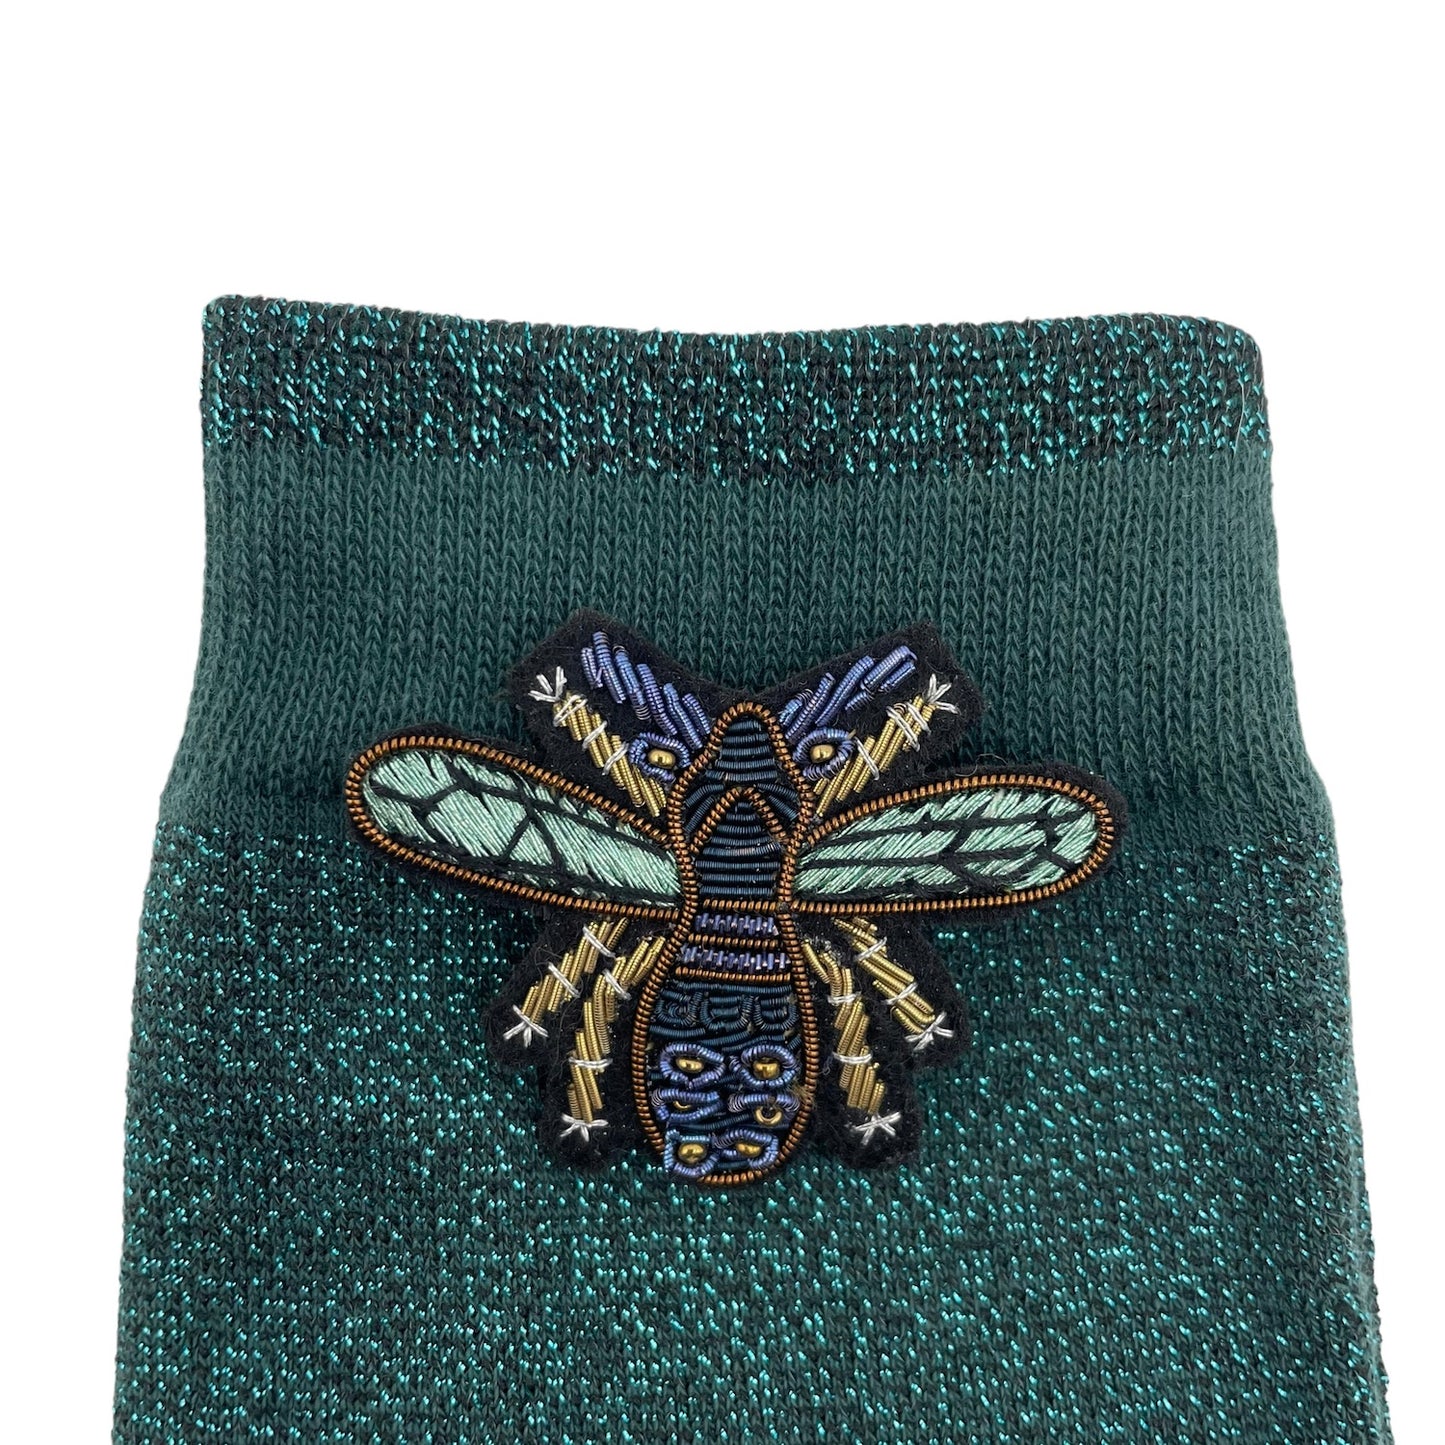 Tokyo socks in teal with a petite insect pin